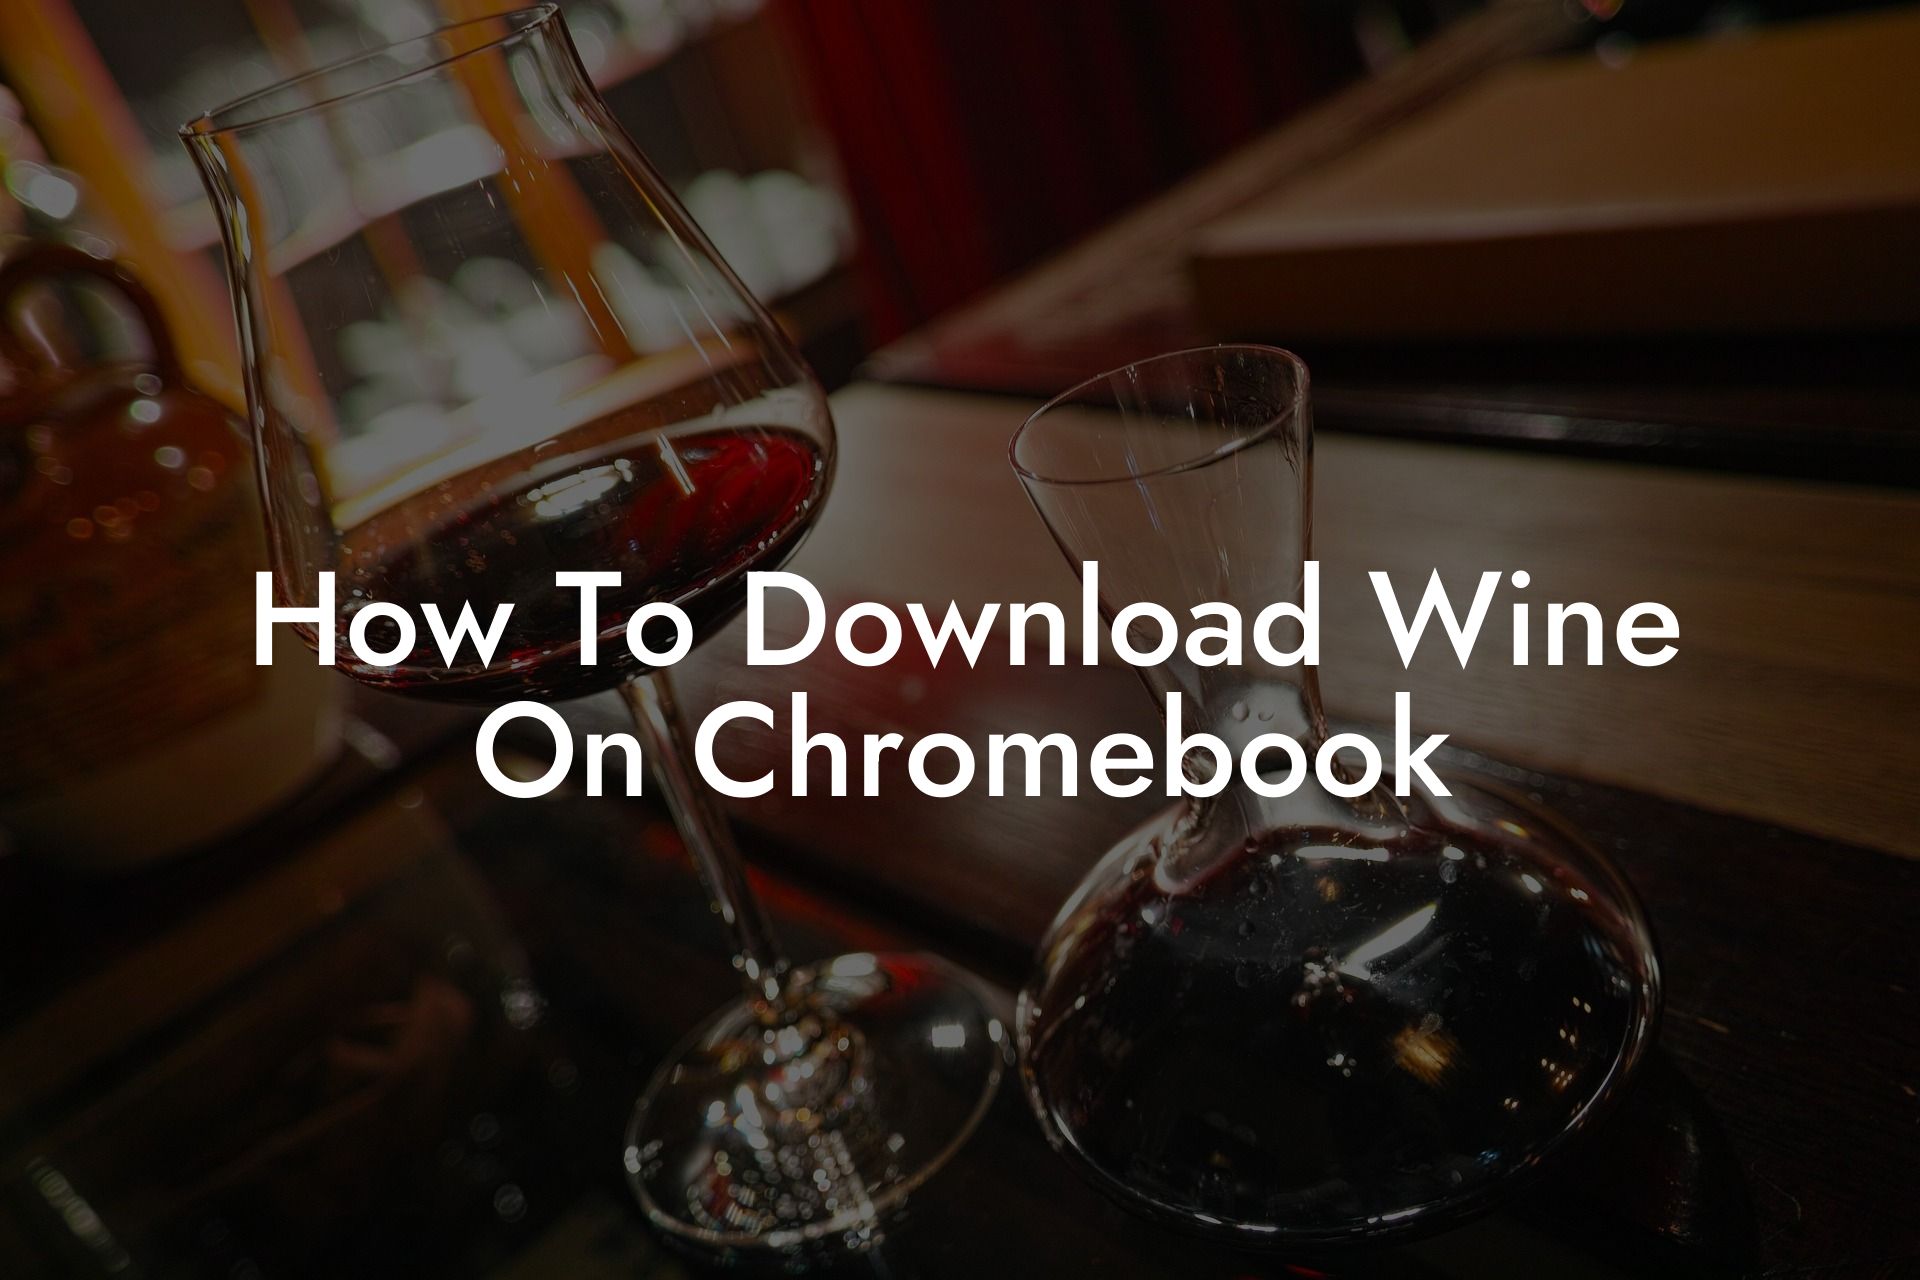 How To Download Wine On Chromebook